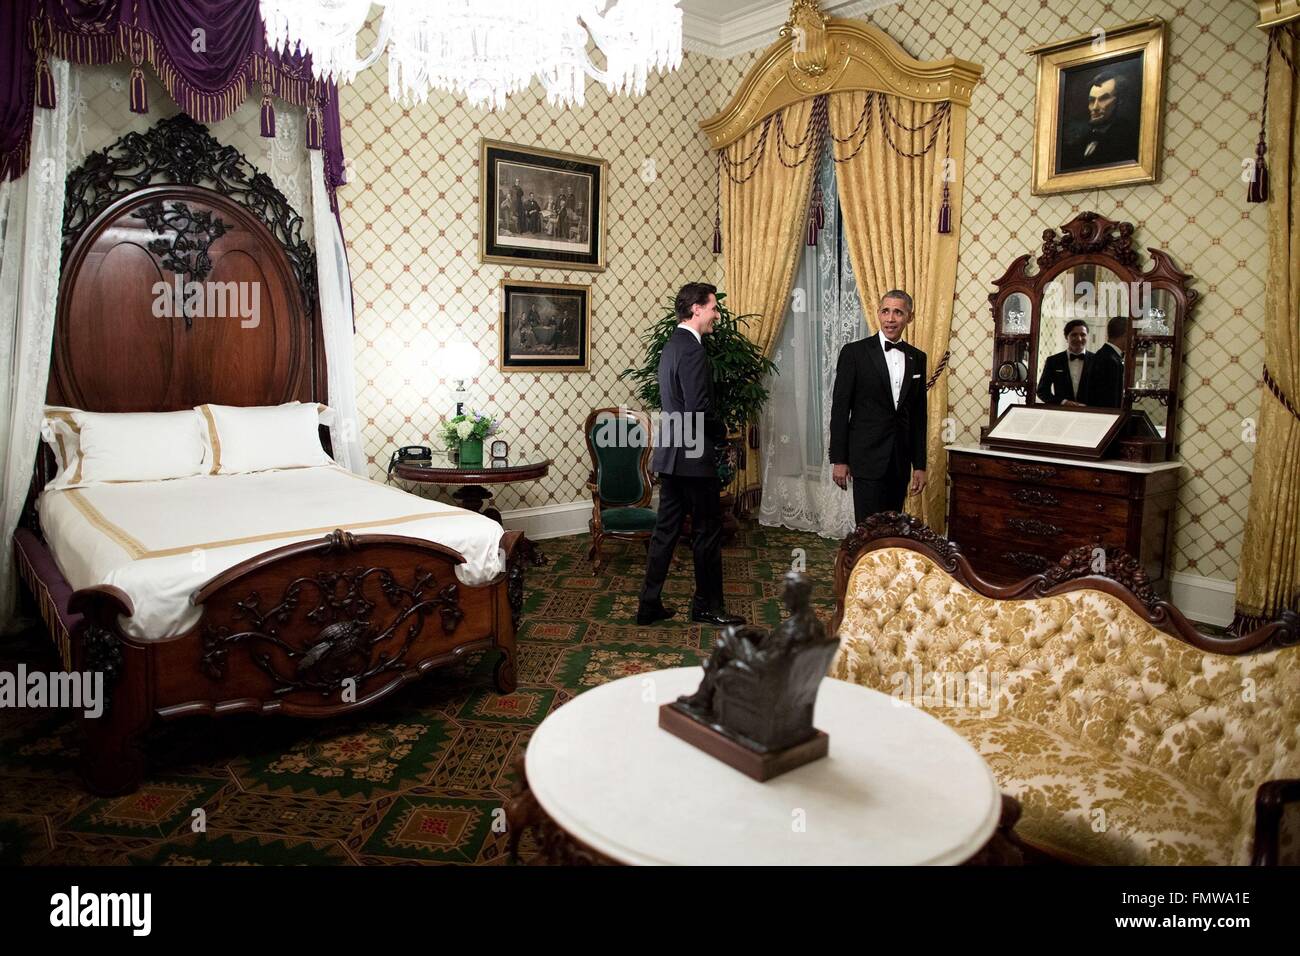 U.S. President Barack Obama shows Canadian Prime Minister Justin Trudeau the Lincoln Bedroom before the State Dinner at the White House March 10, 2016 in Washington, DC. This is the first state visit by a Canadian Prime Minister in 20-years. Stock Photo